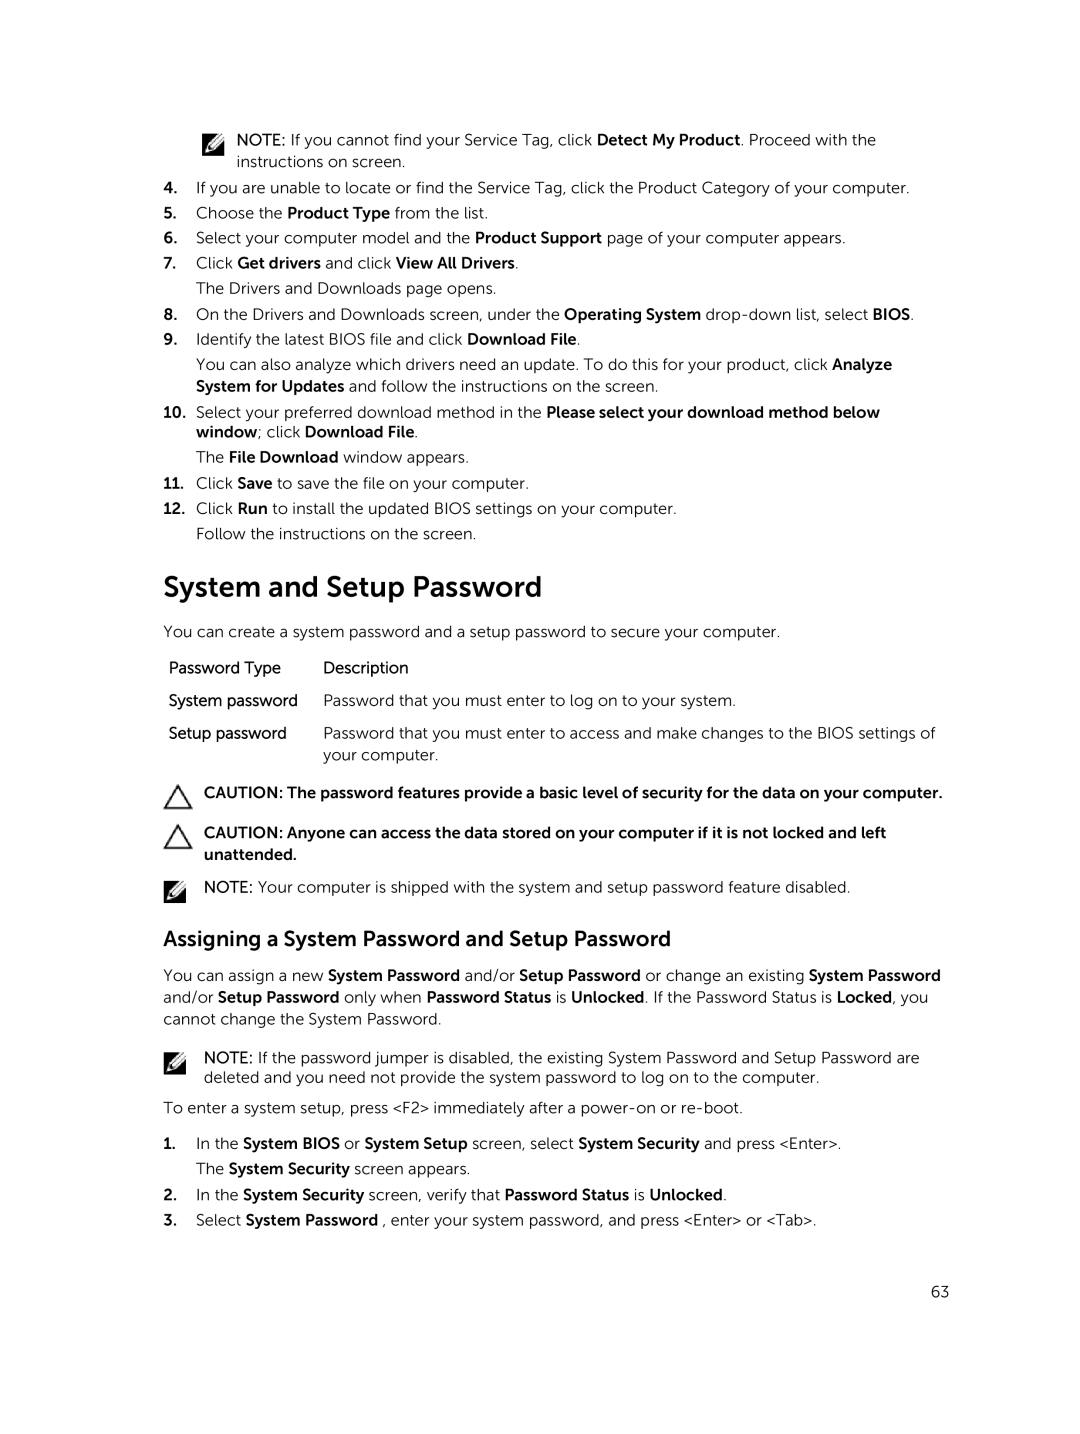 Dell M2800 owner manual System and Setup Password, Password Type 